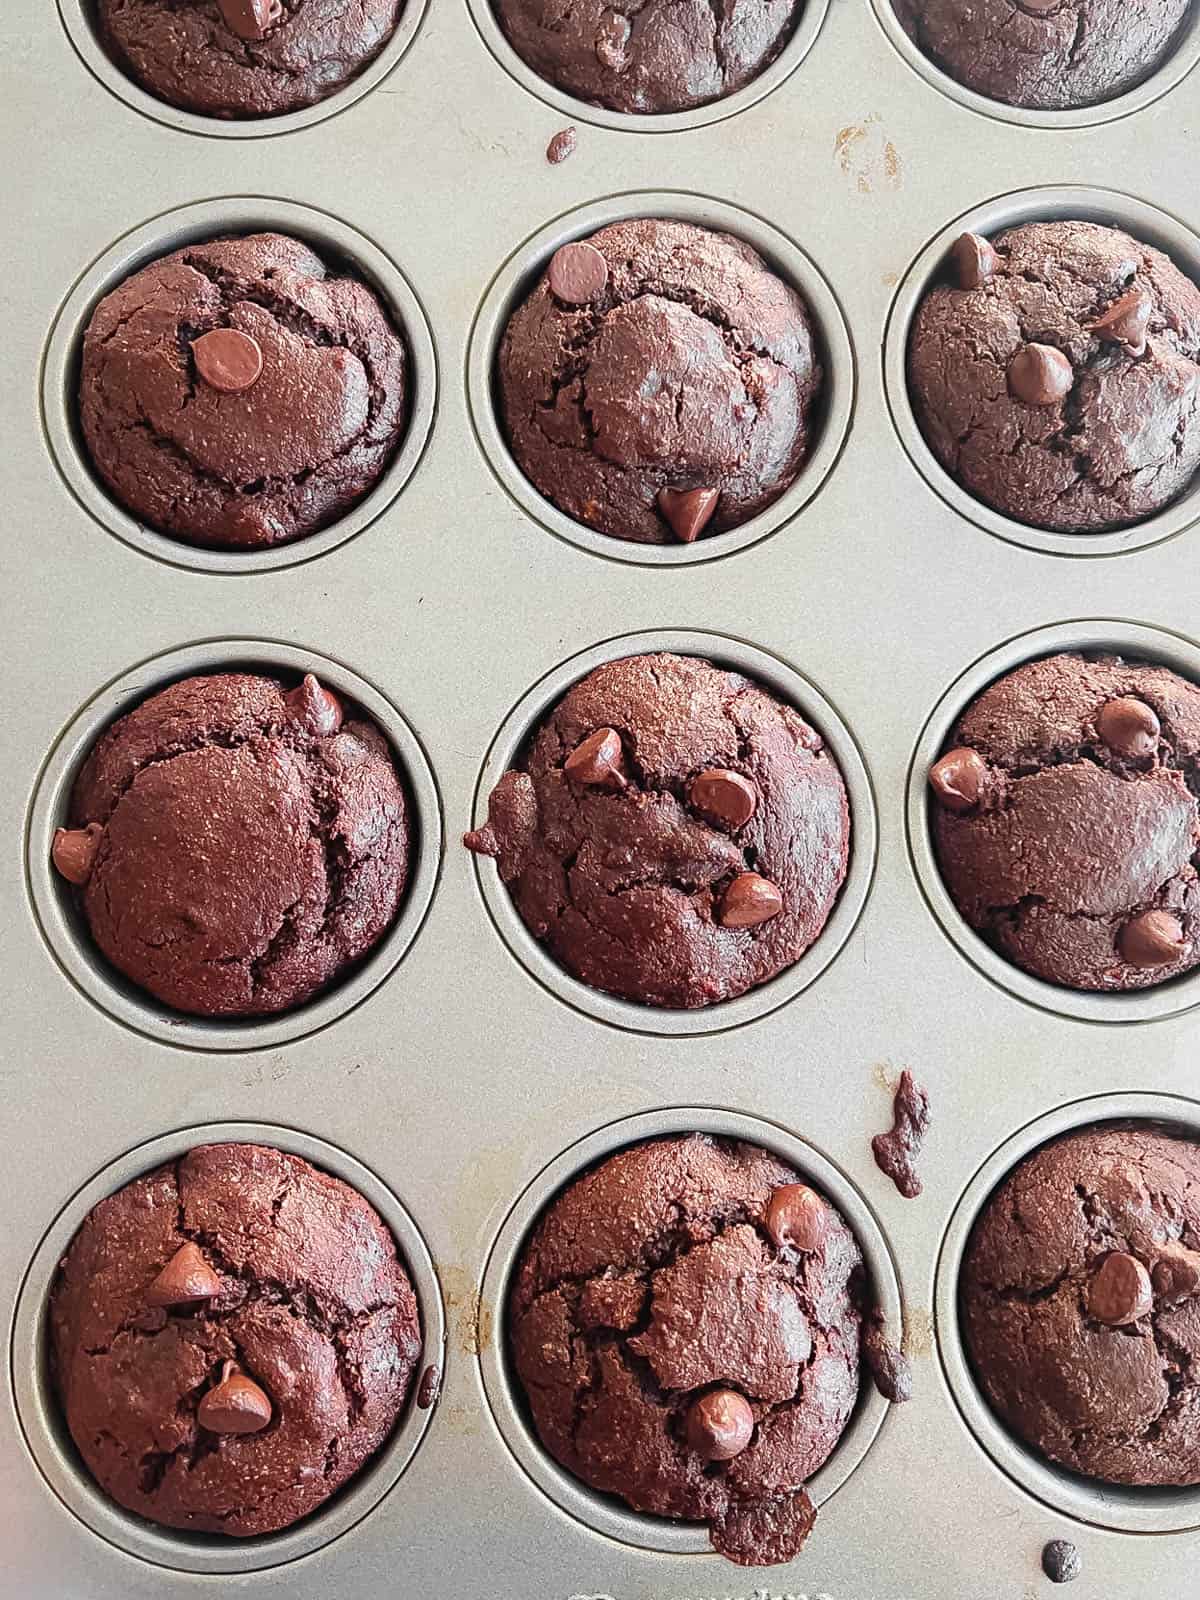 Paleo chocolate muffin batter in muffin tins after baking.